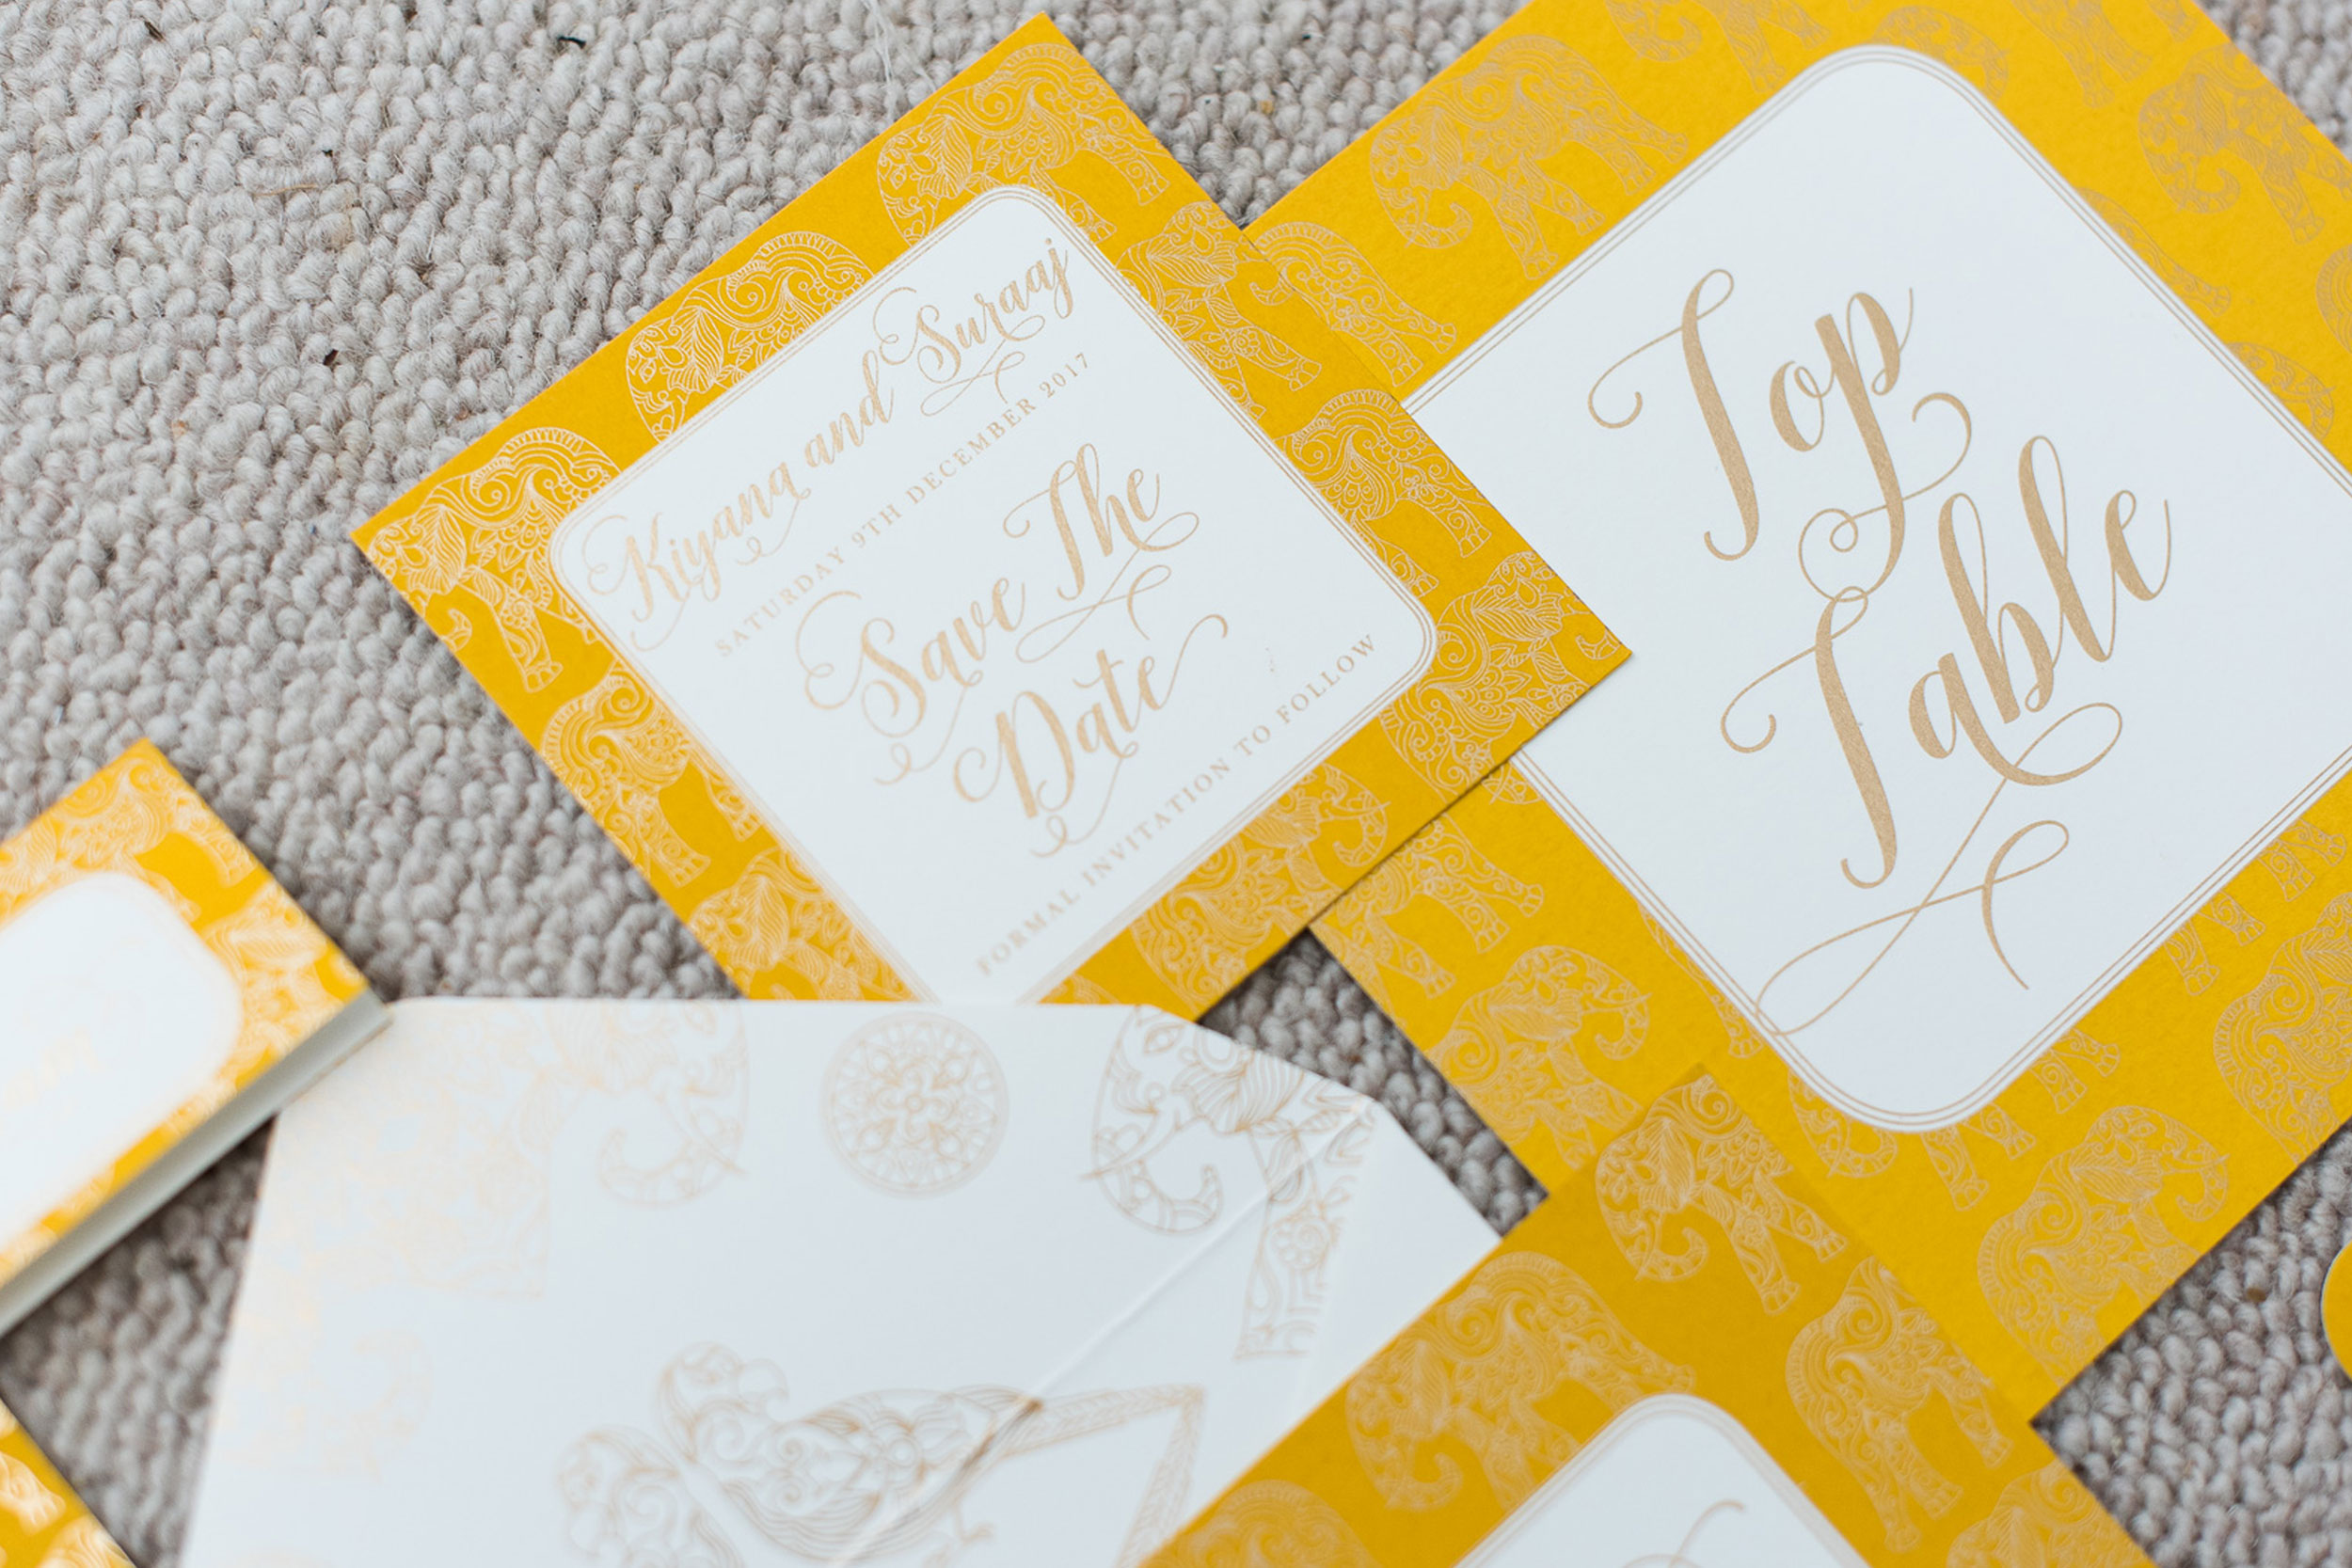 trio-of-life-gold-elephant-save-the-date-and-table-number-wedding-invitation.jpg